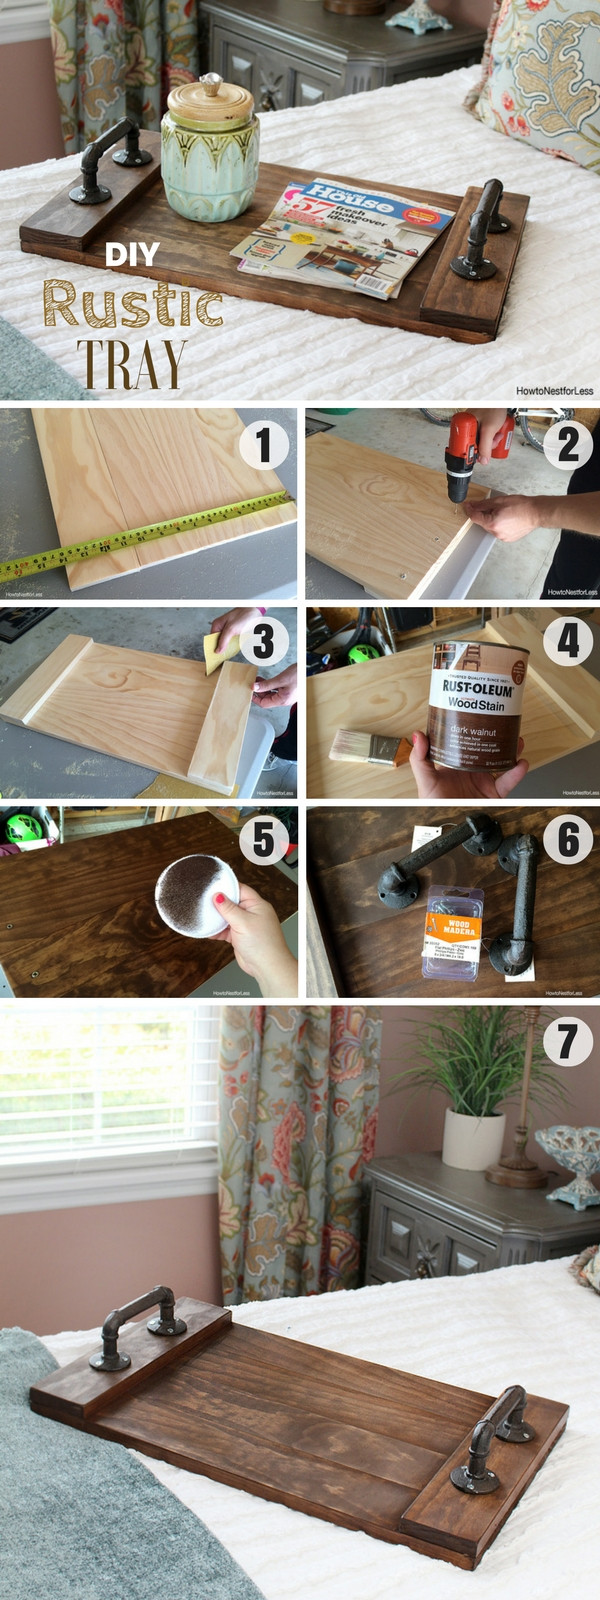 Wood Craft Ideas To Make And Sell
 18 Easy DIY Wood Craft Project Ideas on a Bud